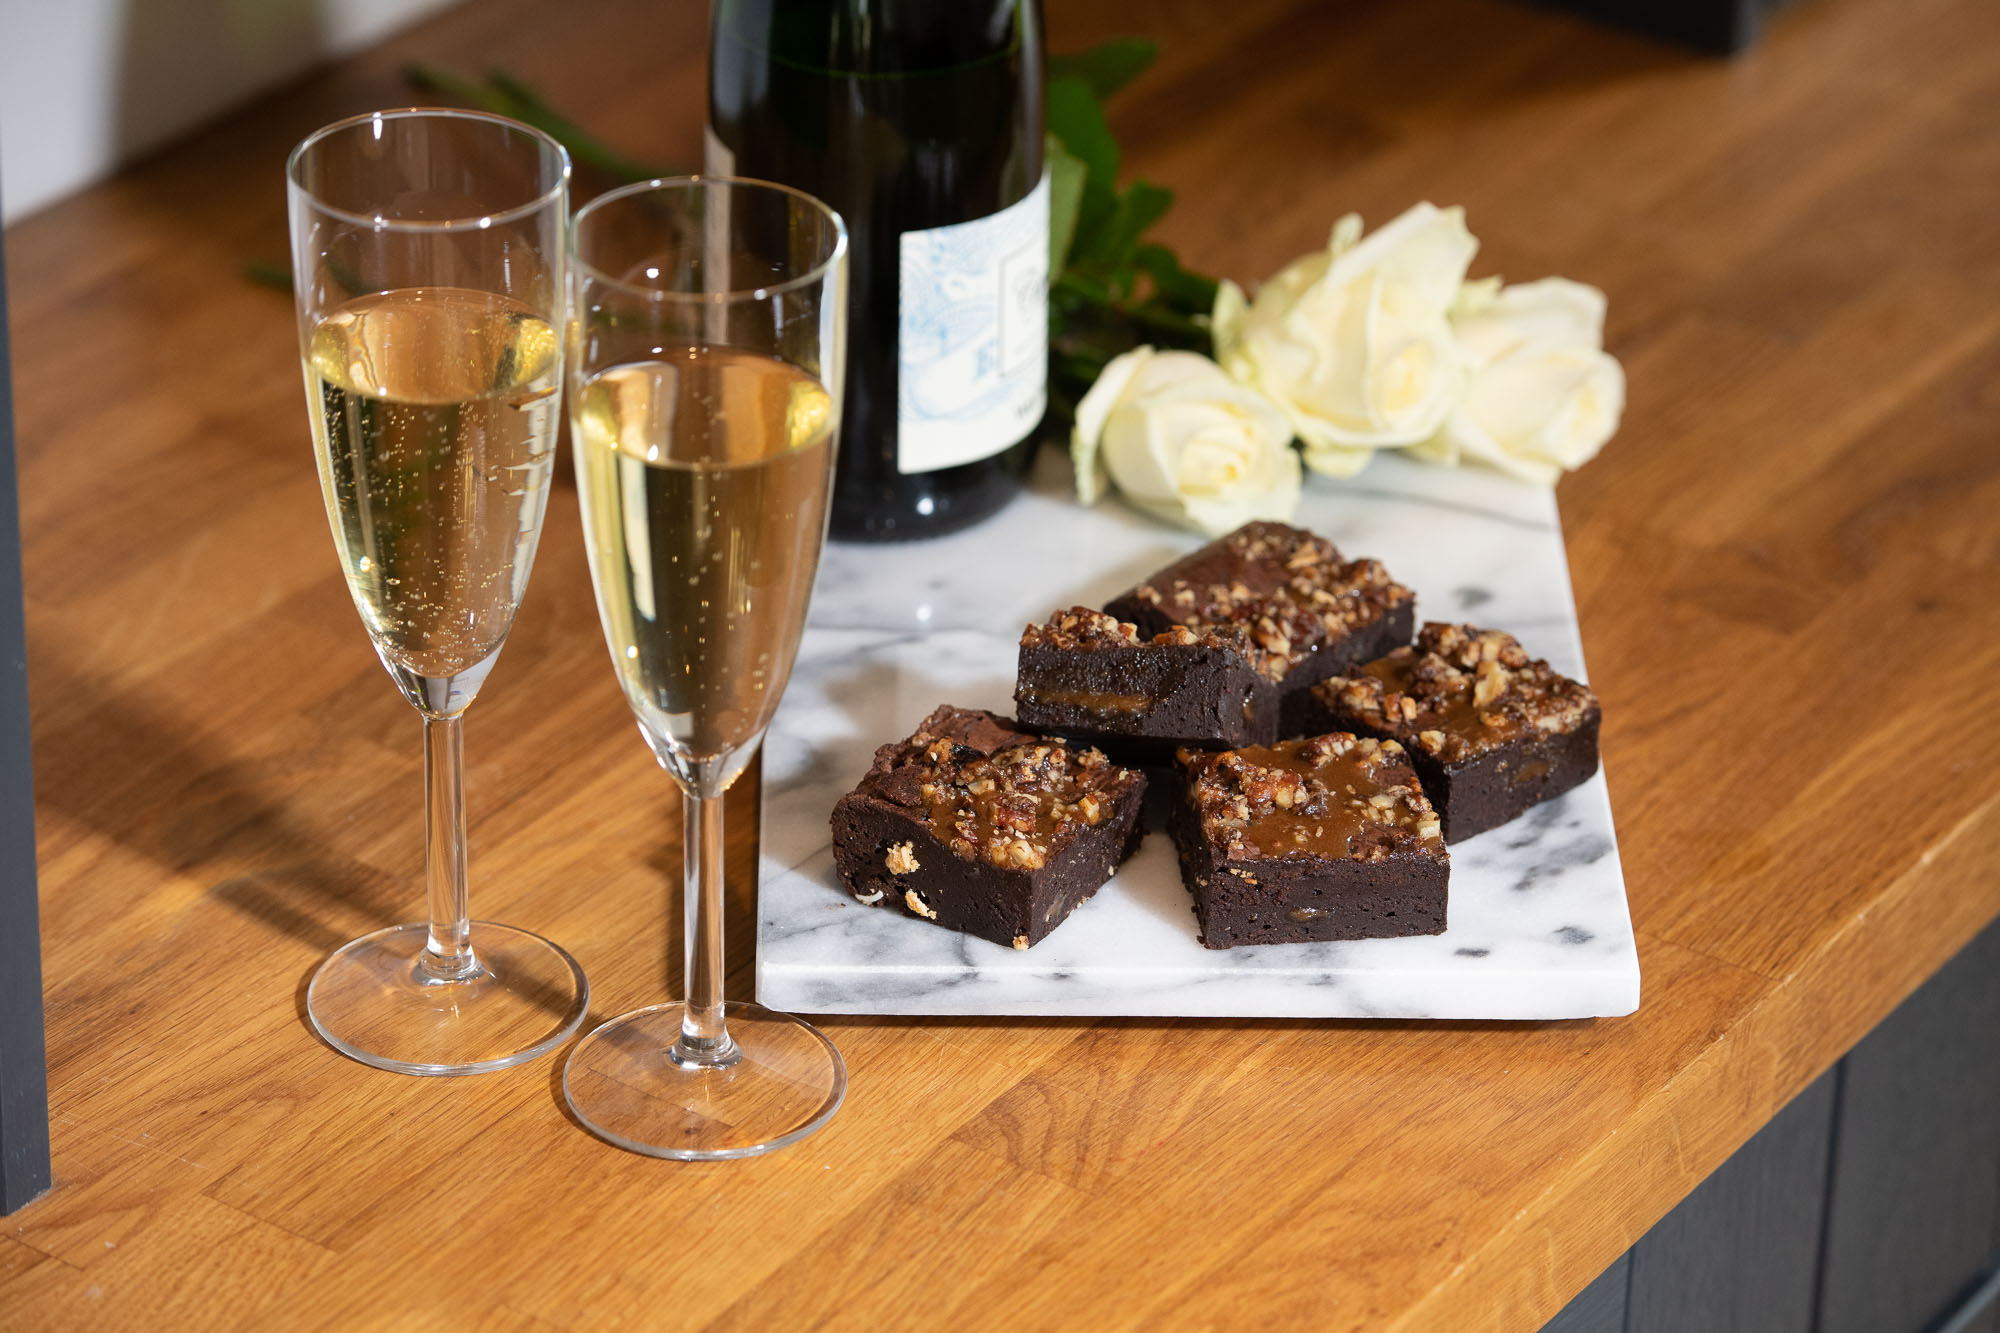 photo features mini wedding brownie stacks. The 5 stacked brownies are on a marble chopping board. The chopping board is on a wooden worktop. There are two champagne flutes in the foreground and there is a bottle of champagne and white roses in the background (on the marble) chopping board